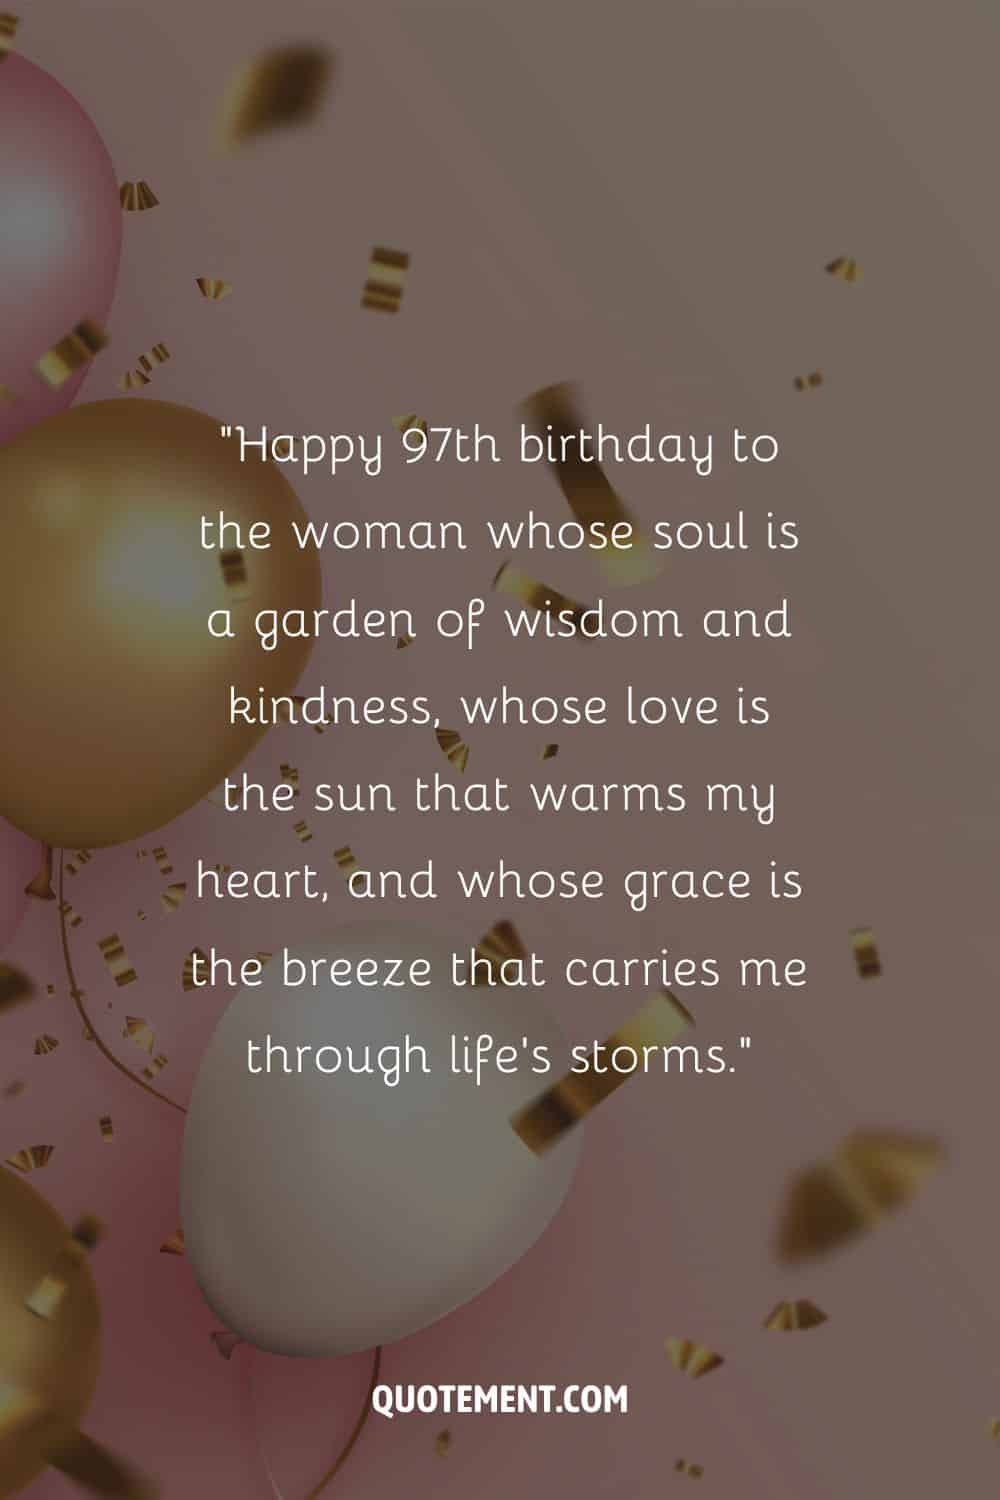 Heart touching message for a mom's 97th birthday and balloons and confetti in the background, too
